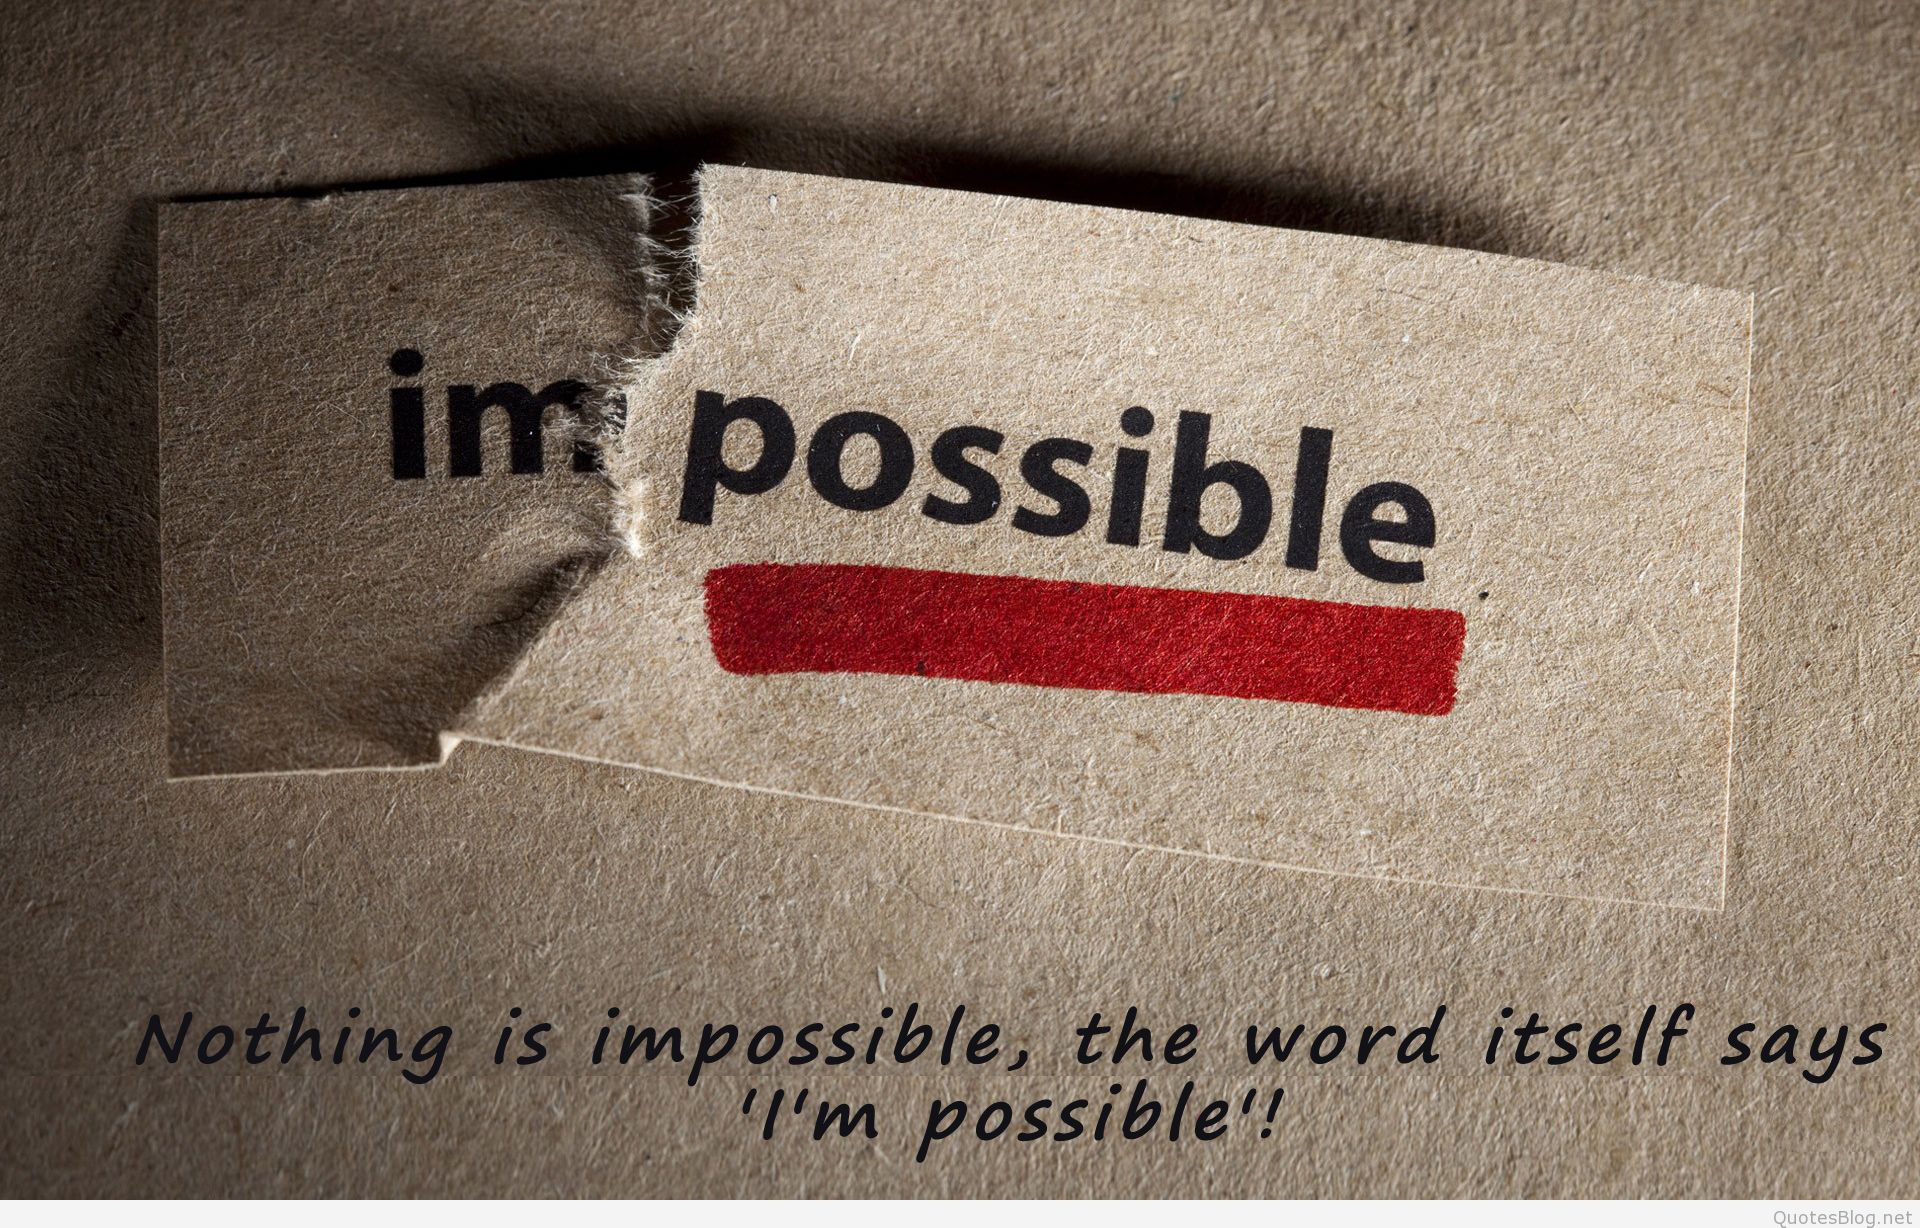 Impossible Greeting Thought Wallpaper - Cafe Bazza , HD Wallpaper & Backgrounds